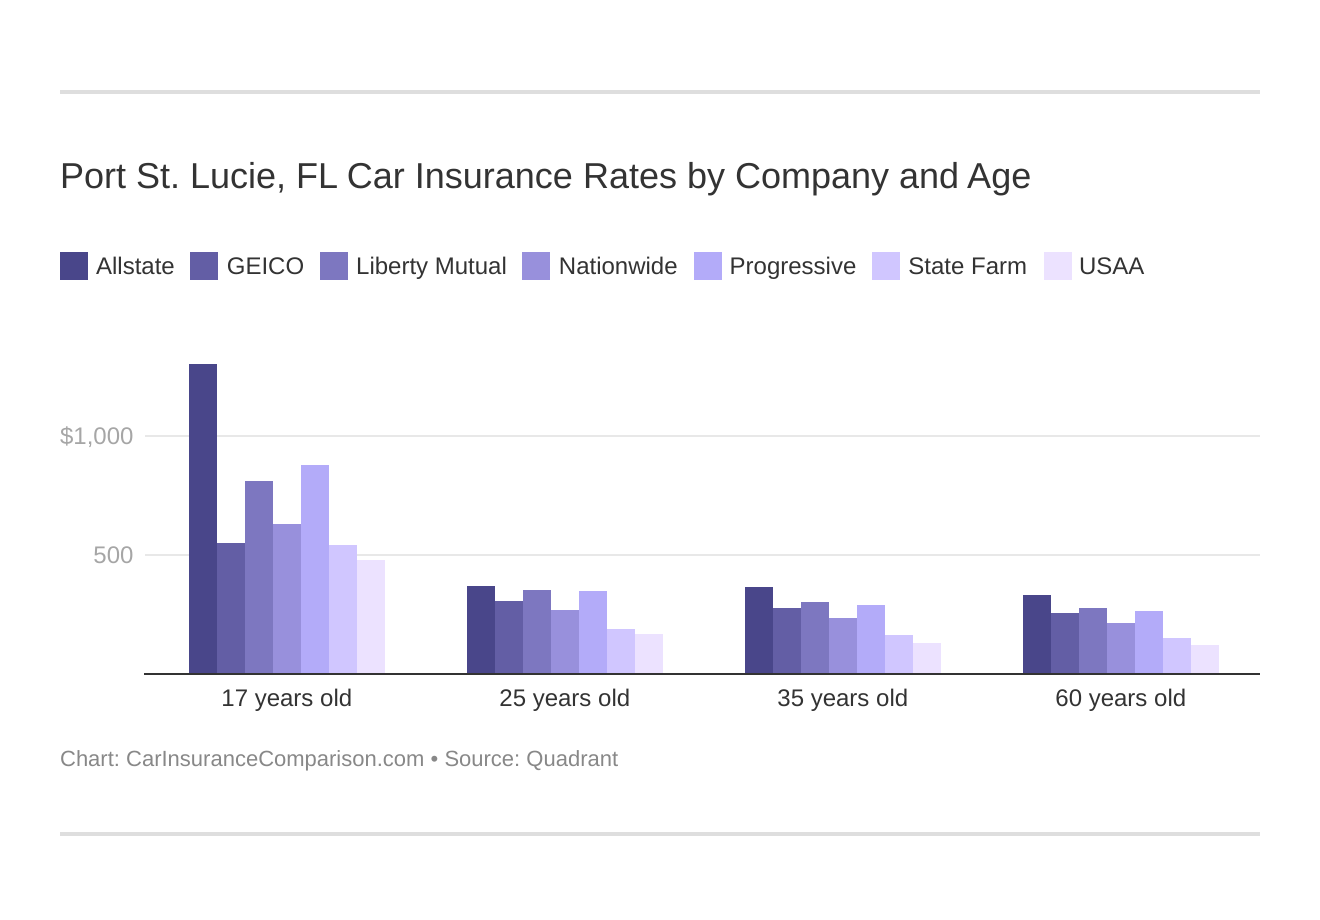 Port St. Lucie, FL Car Insurance Rates by Company and Age